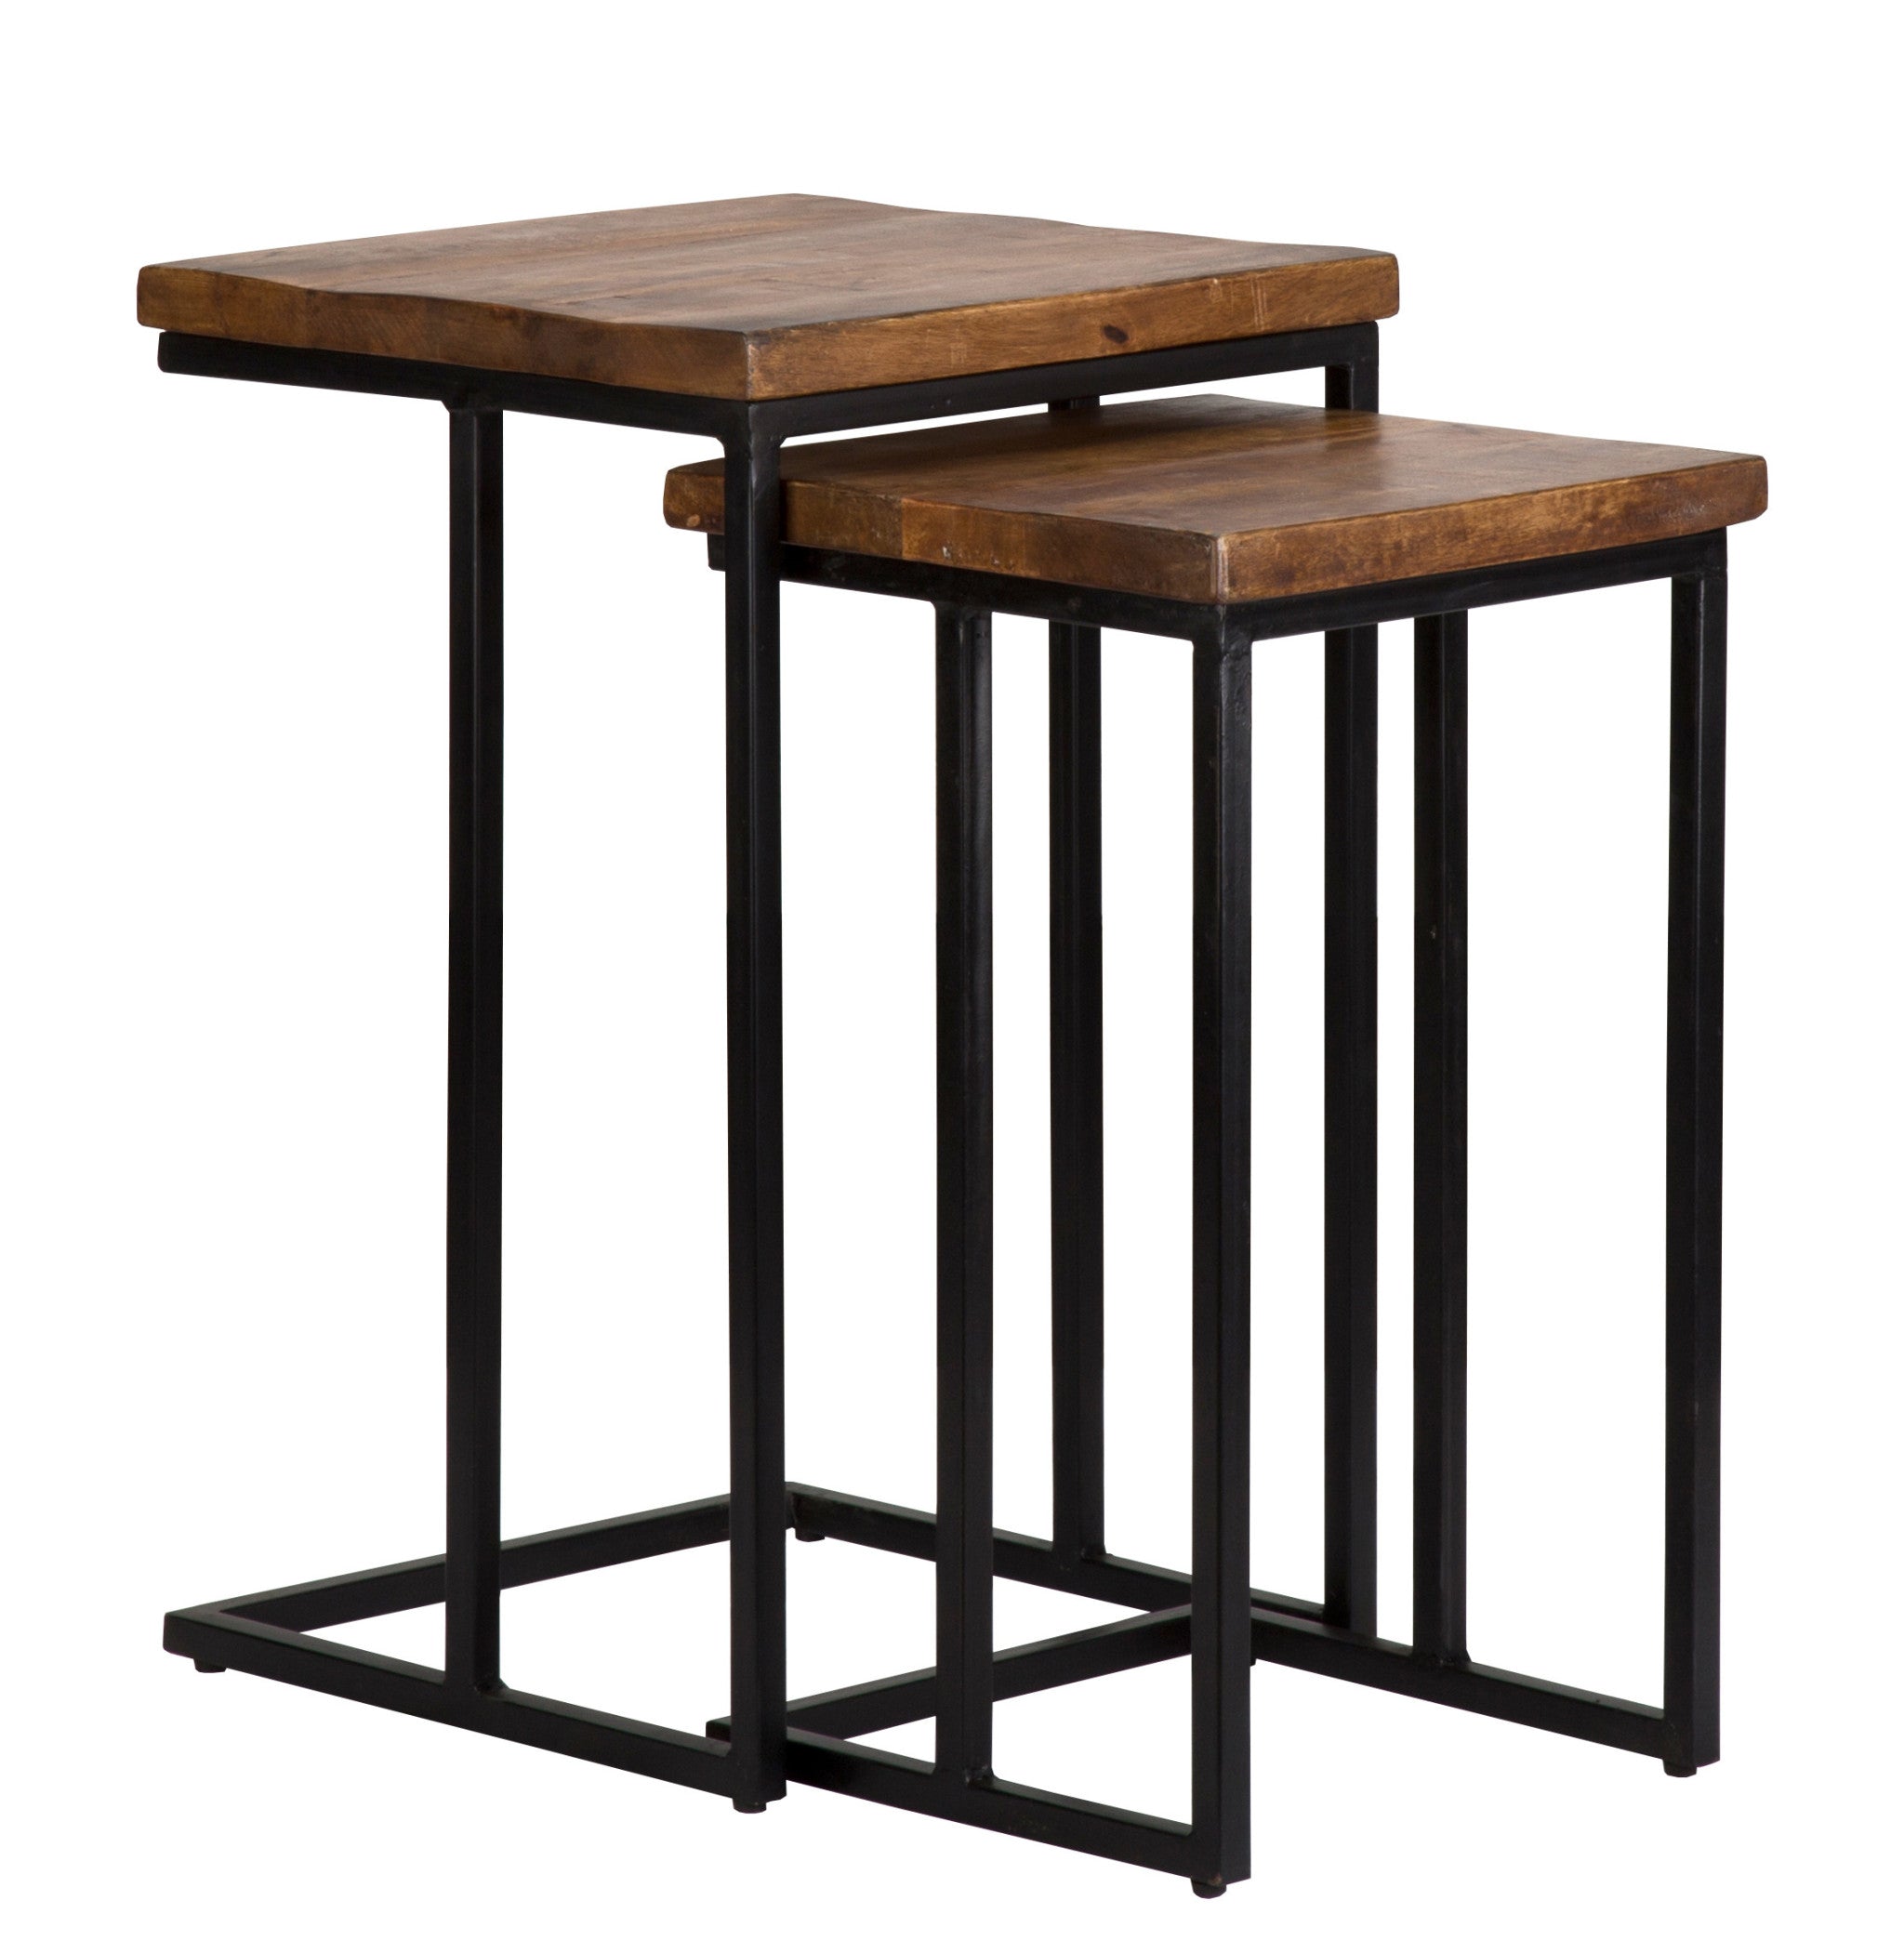 Set of Two 26" Black and Mahogany Solid Wood Nested Tables